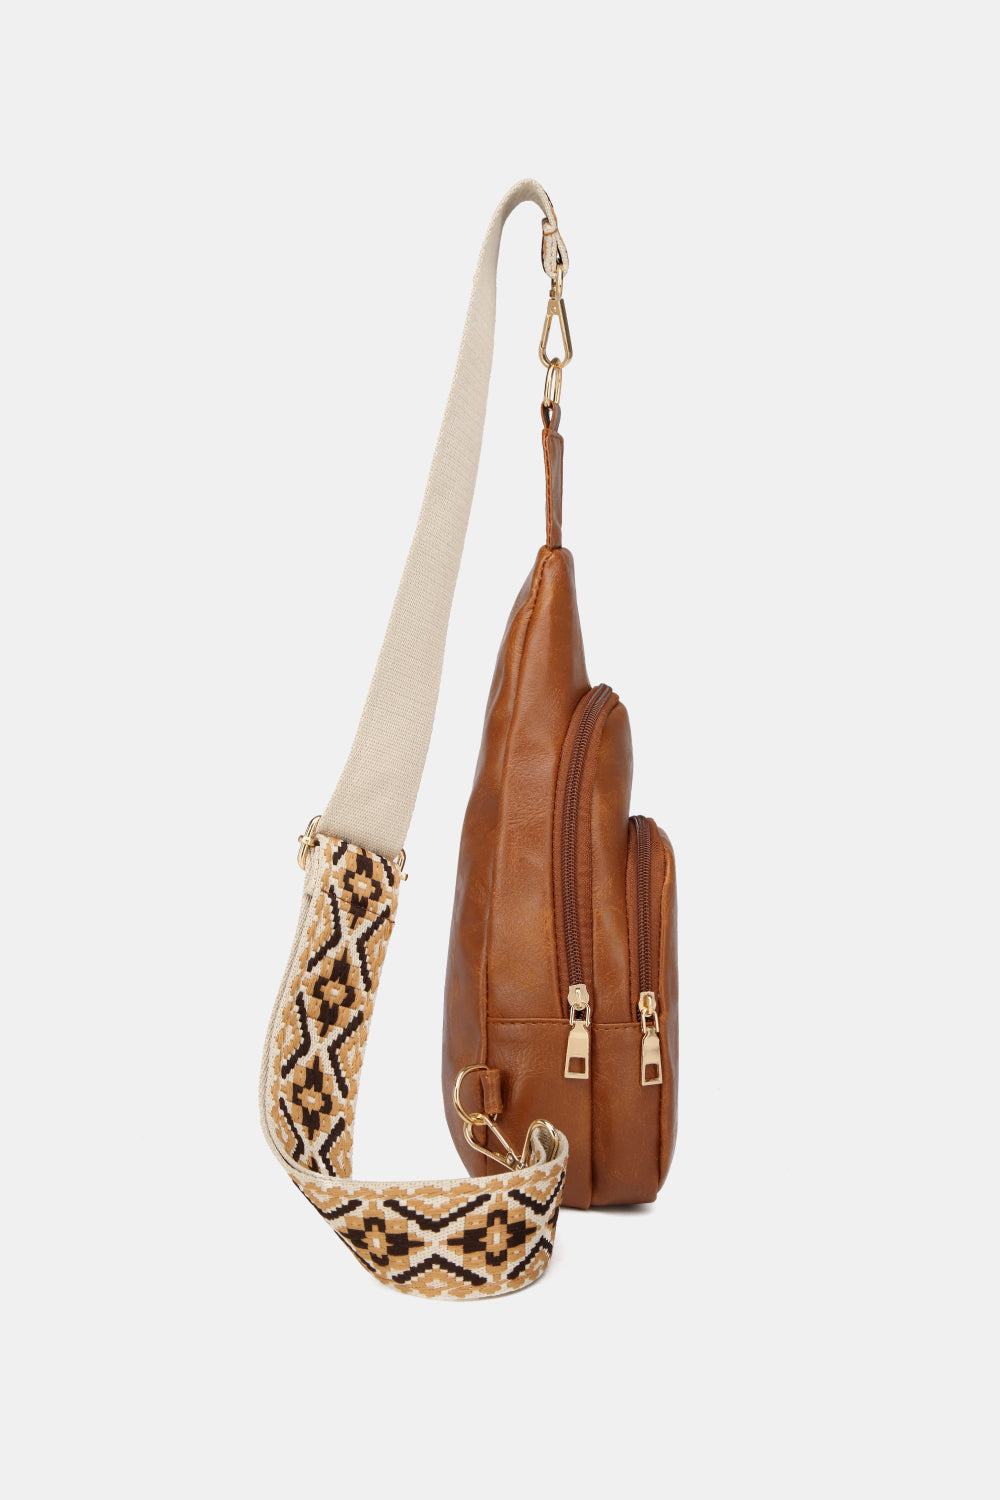 Reconstituted Leather Leather Sling Bag